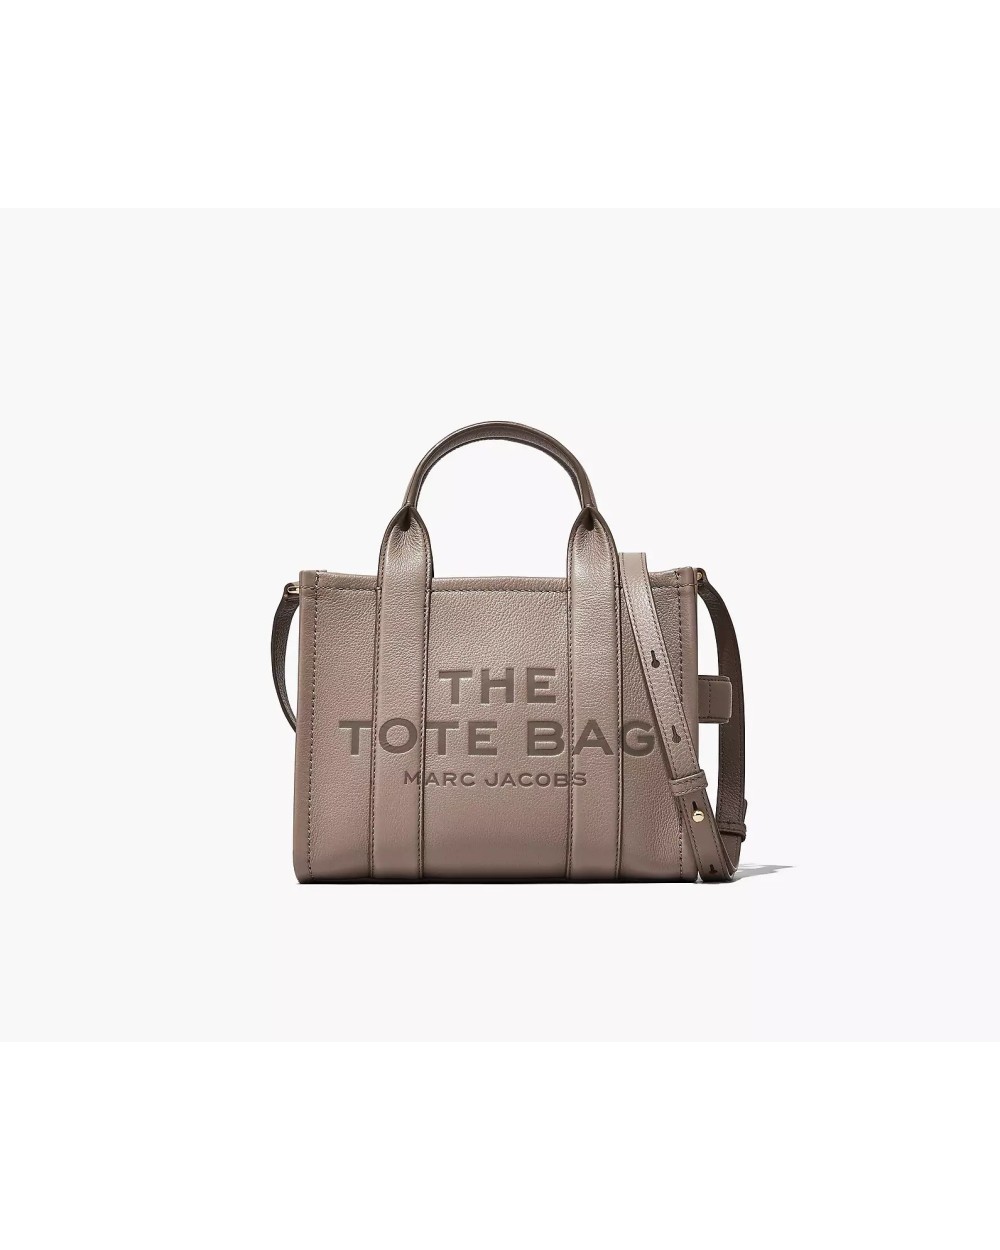 THE SMALL LEATHER TOTE